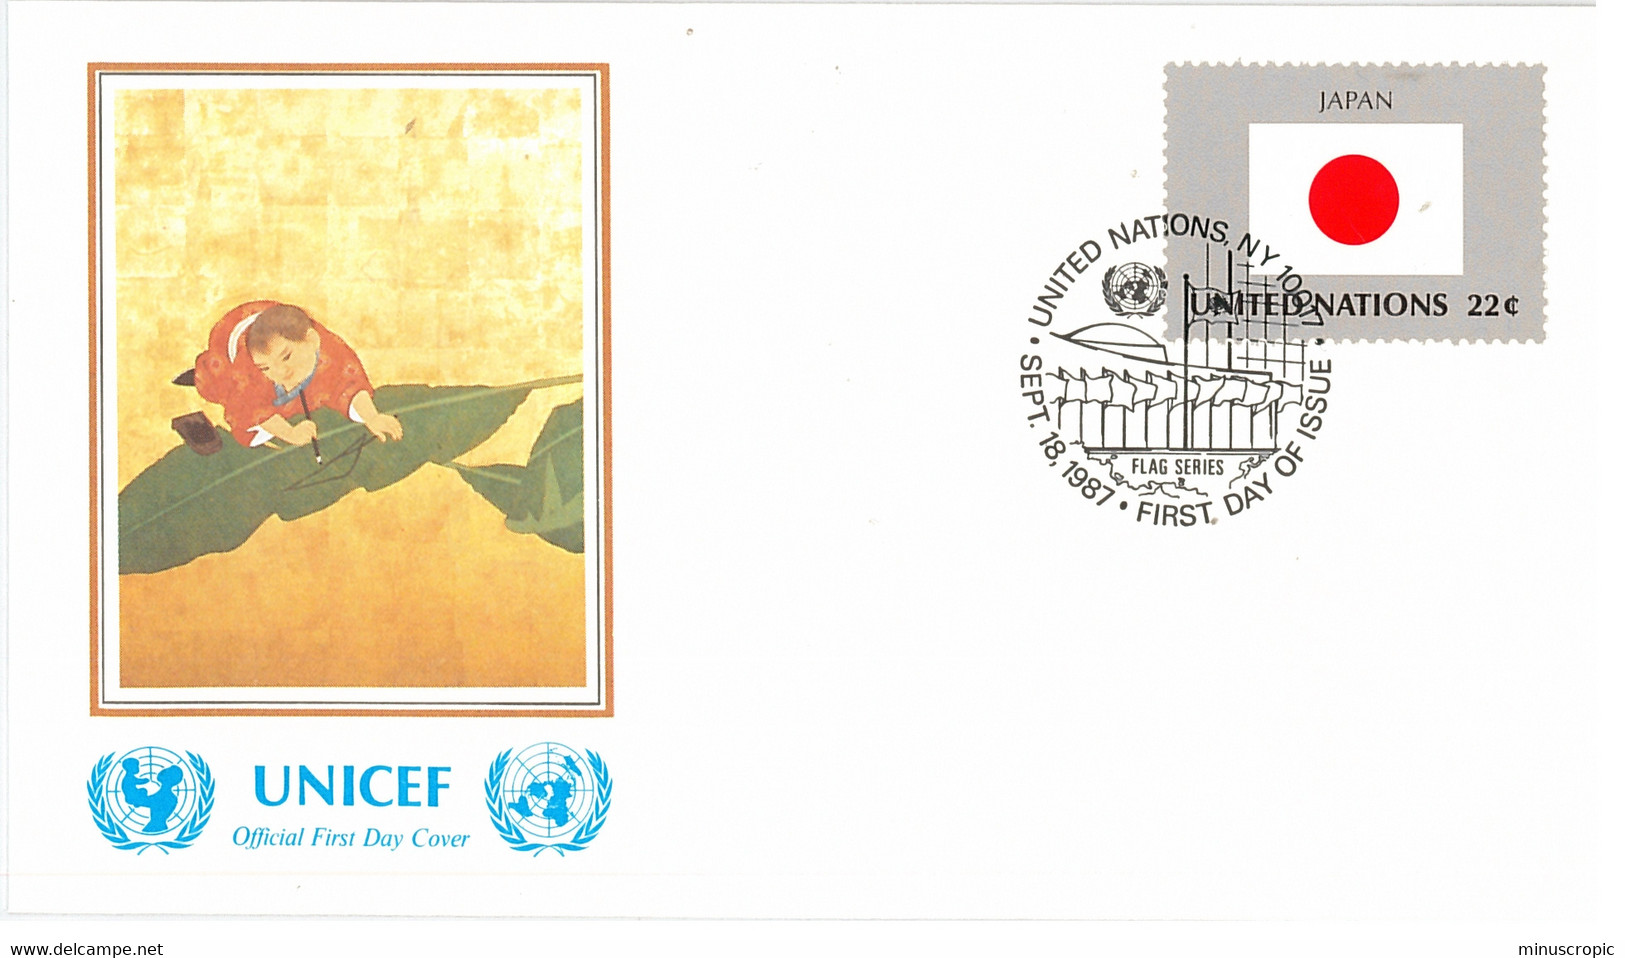 Enveloppe FDC United Nations - UNICEF - Flag Series 11/87 - Japan - 1987 - Covers & Documents